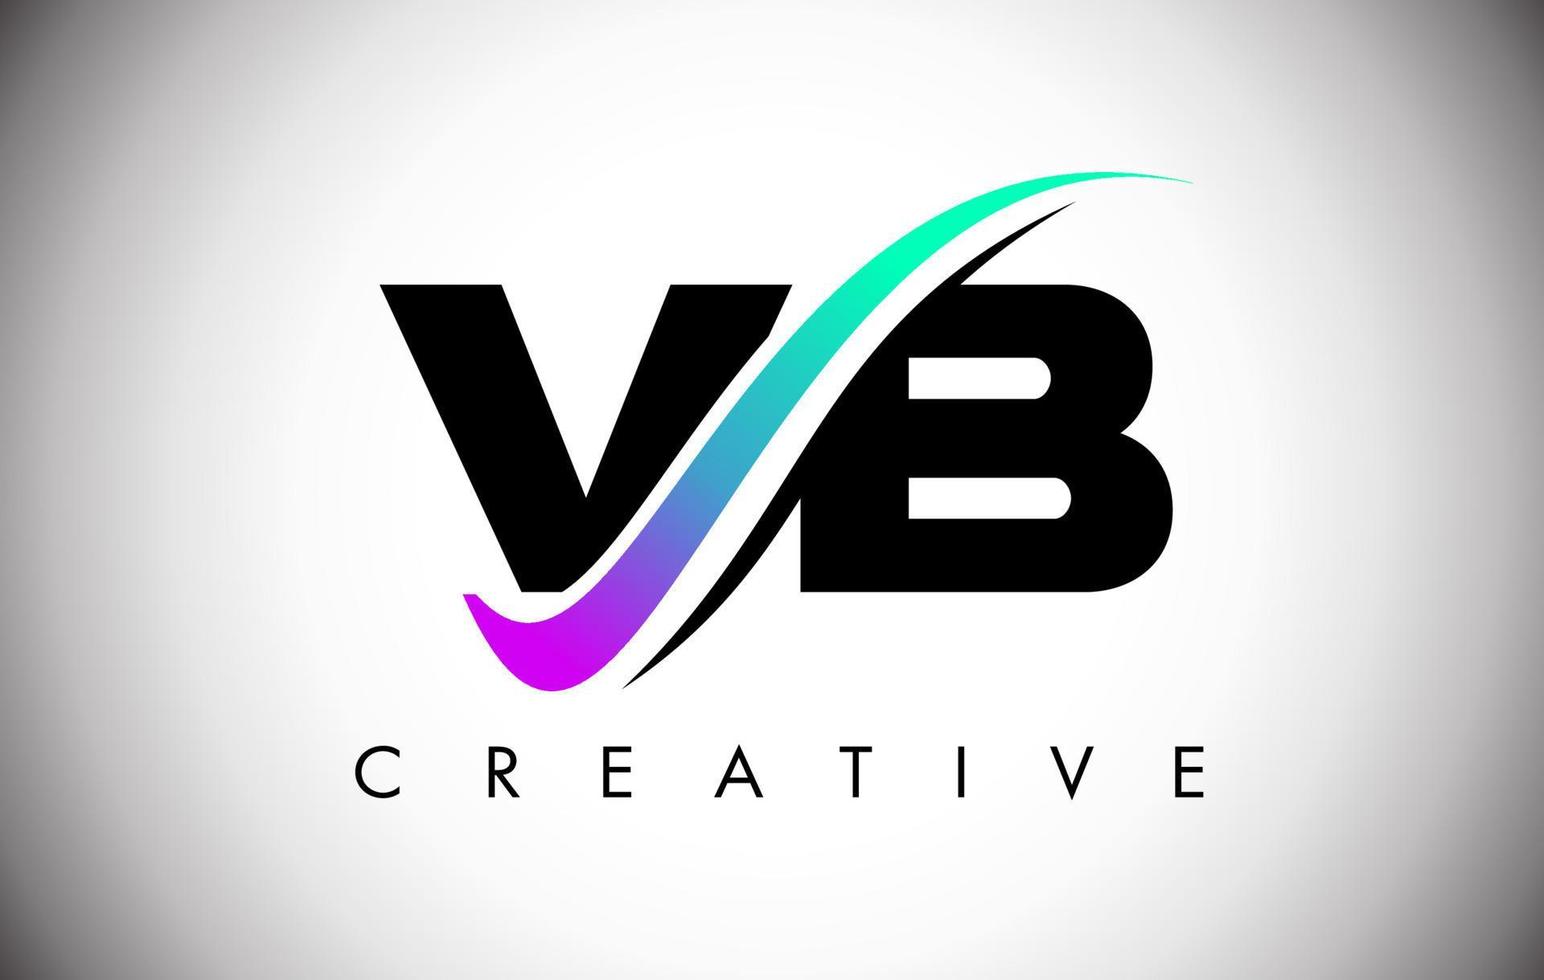 VB Letter Logo with Creative Swoosh Curved Line and Bold Font and Vibrant Colors vector